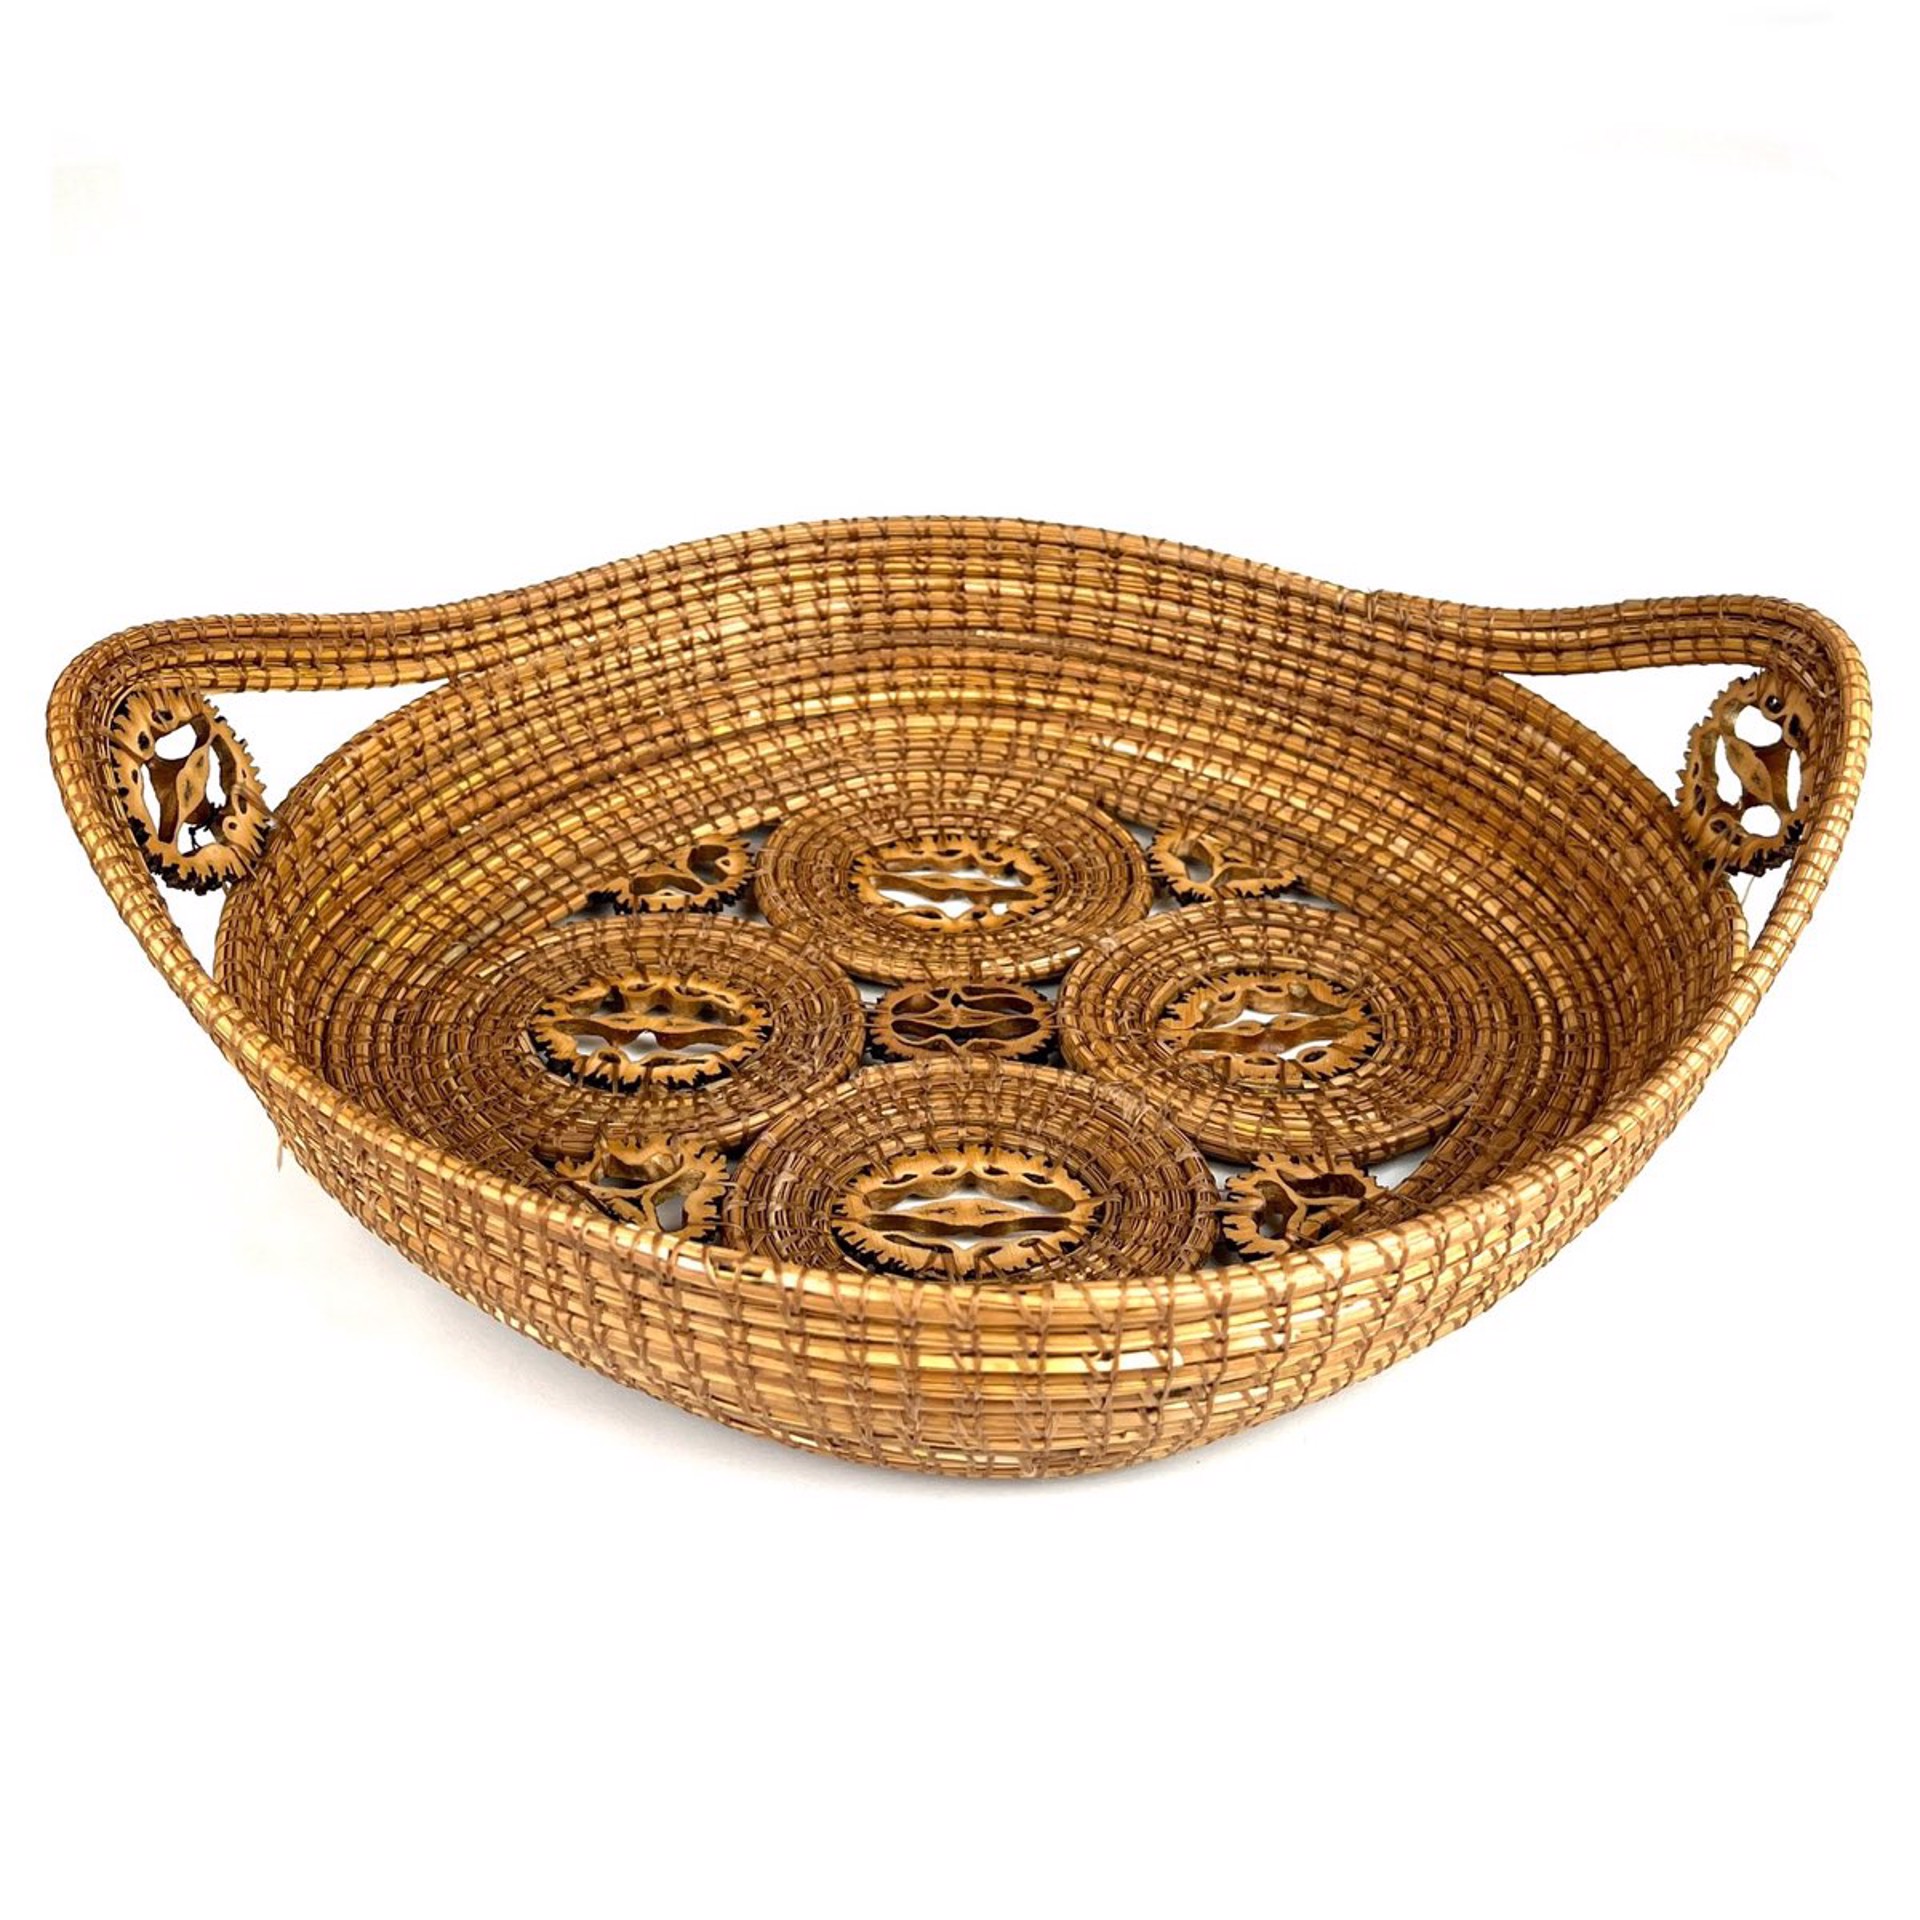 Oval Basket with Side Handles by Jacqueline Green